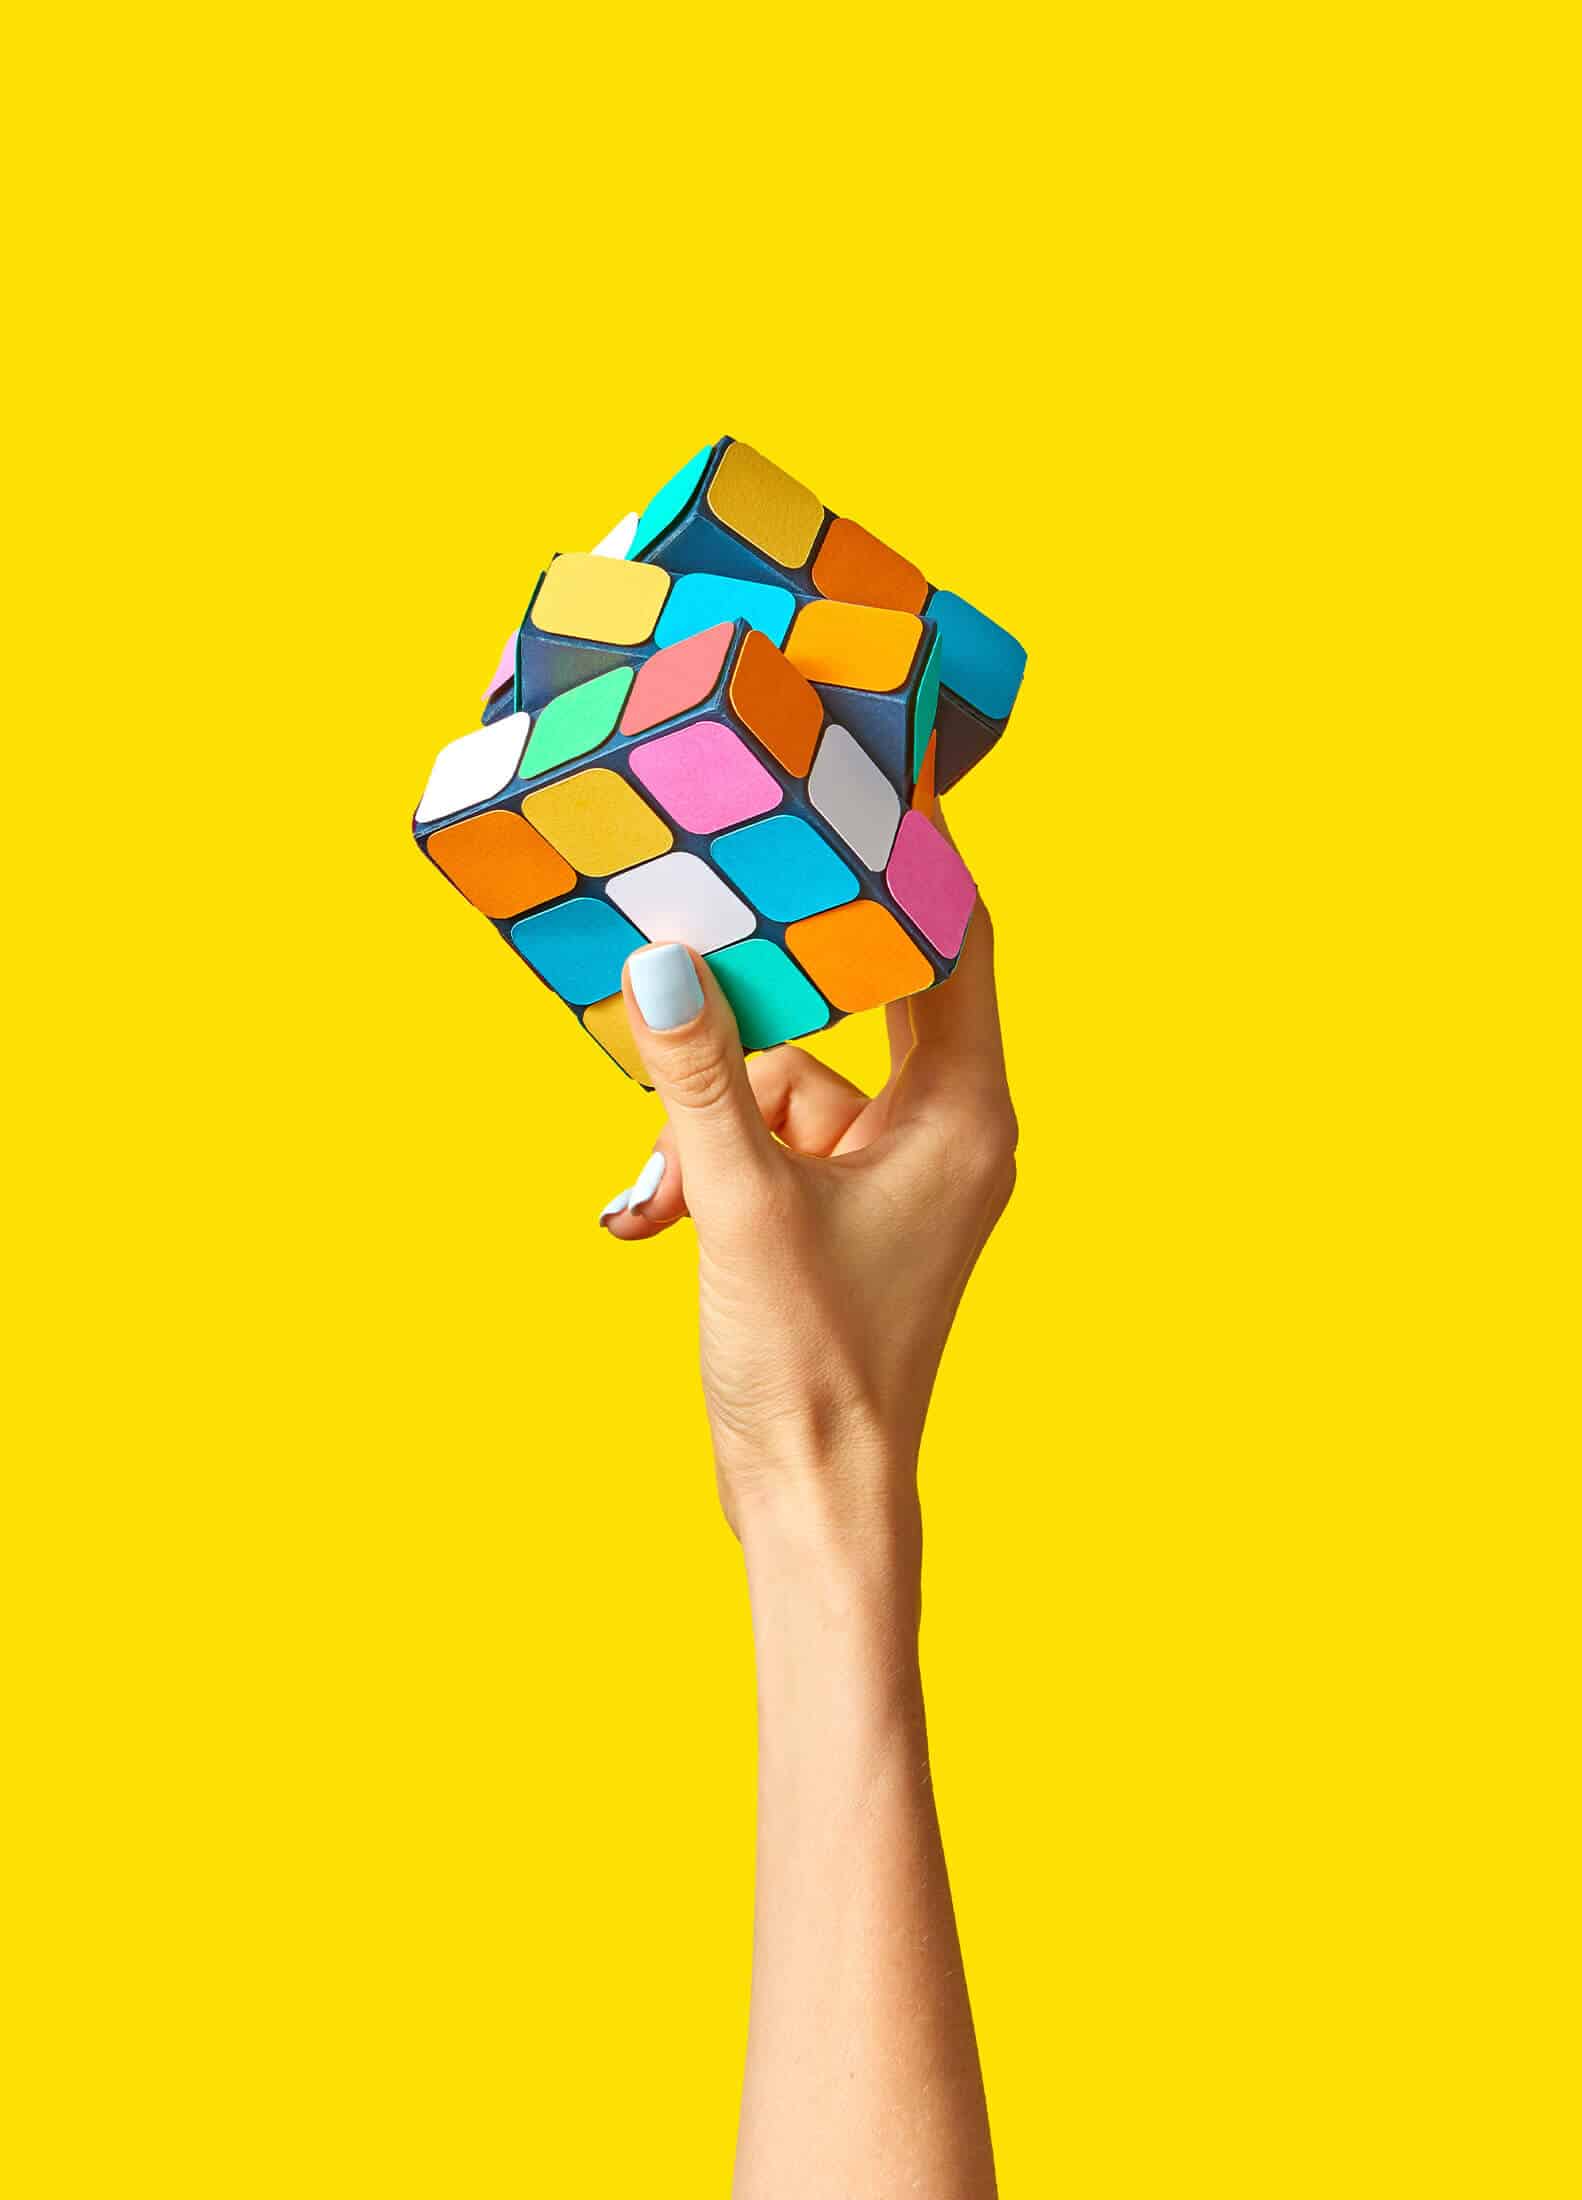 Isolated hand holding a rubik's cube in front of a bright yellow background